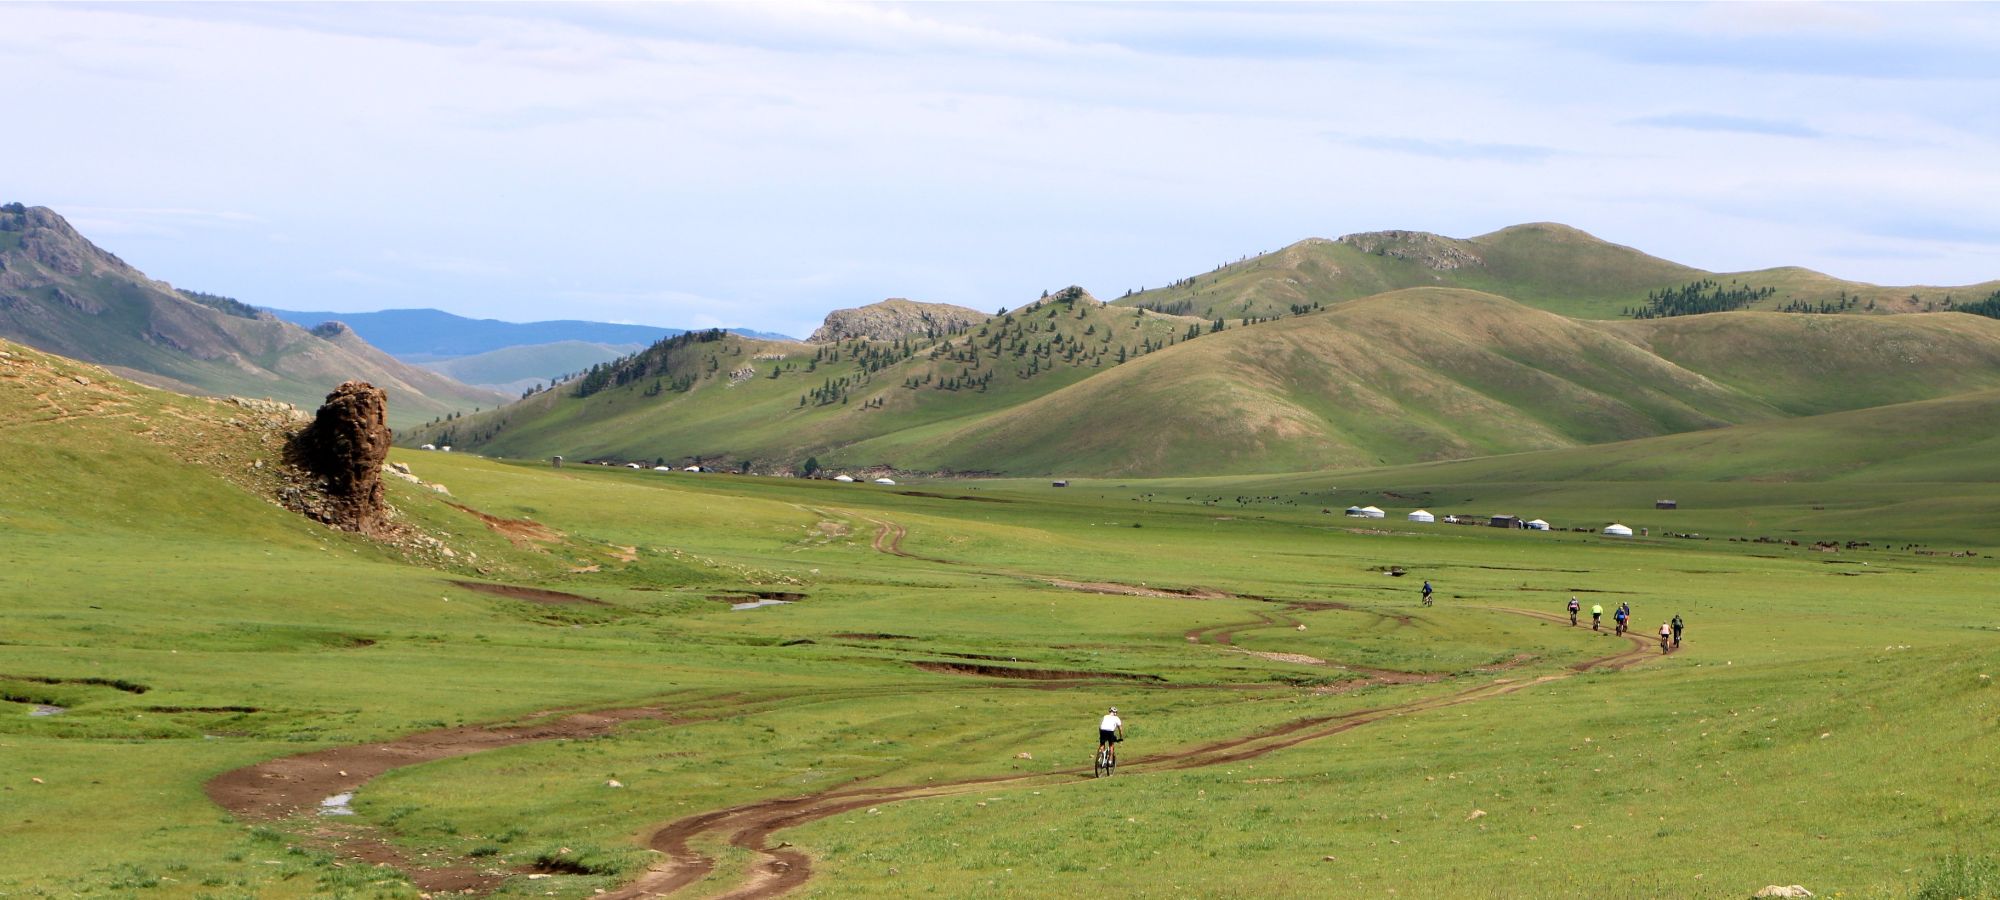 Photos from our Mongolia Gobi Cycling Holiday